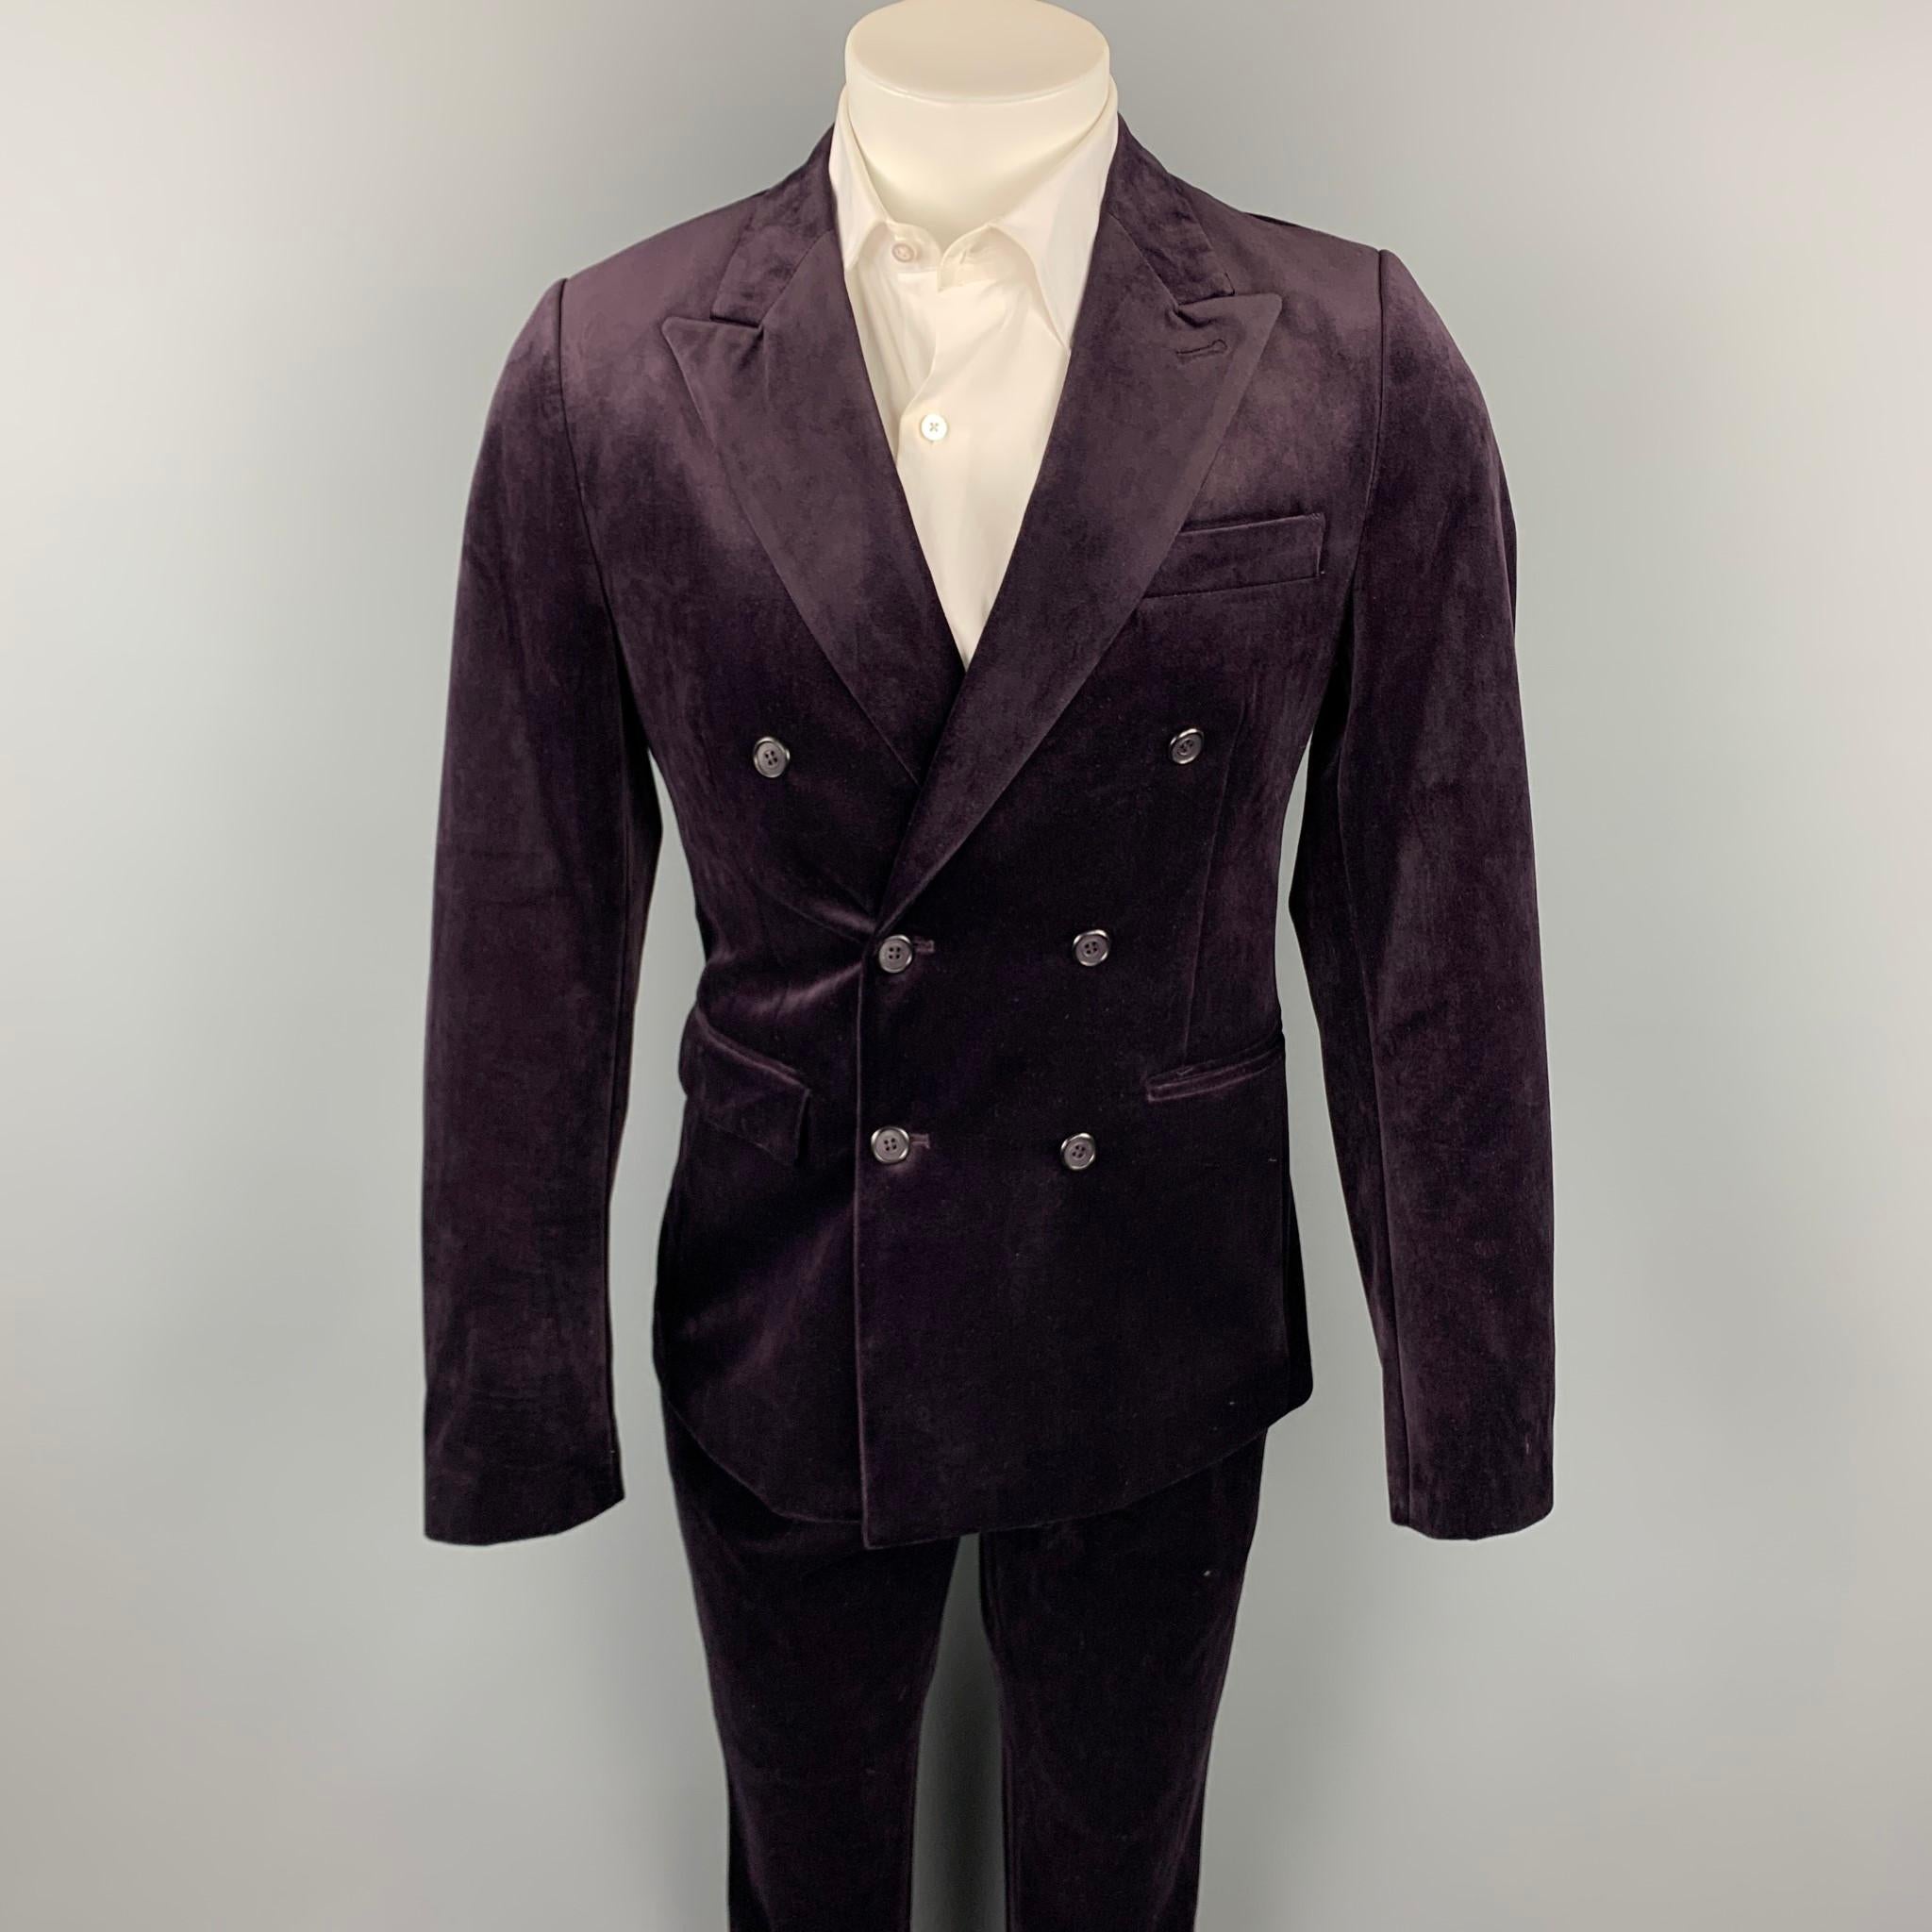 FERAUD suit comes in a purple polyester with a full liner and includes a double breasted button sport coat with a peak lapel and matching flat front trousers.

Very Good Pre-Owned Condition.
Marked: 38

Measurements:

-Jacket
Shoulder: 16.5